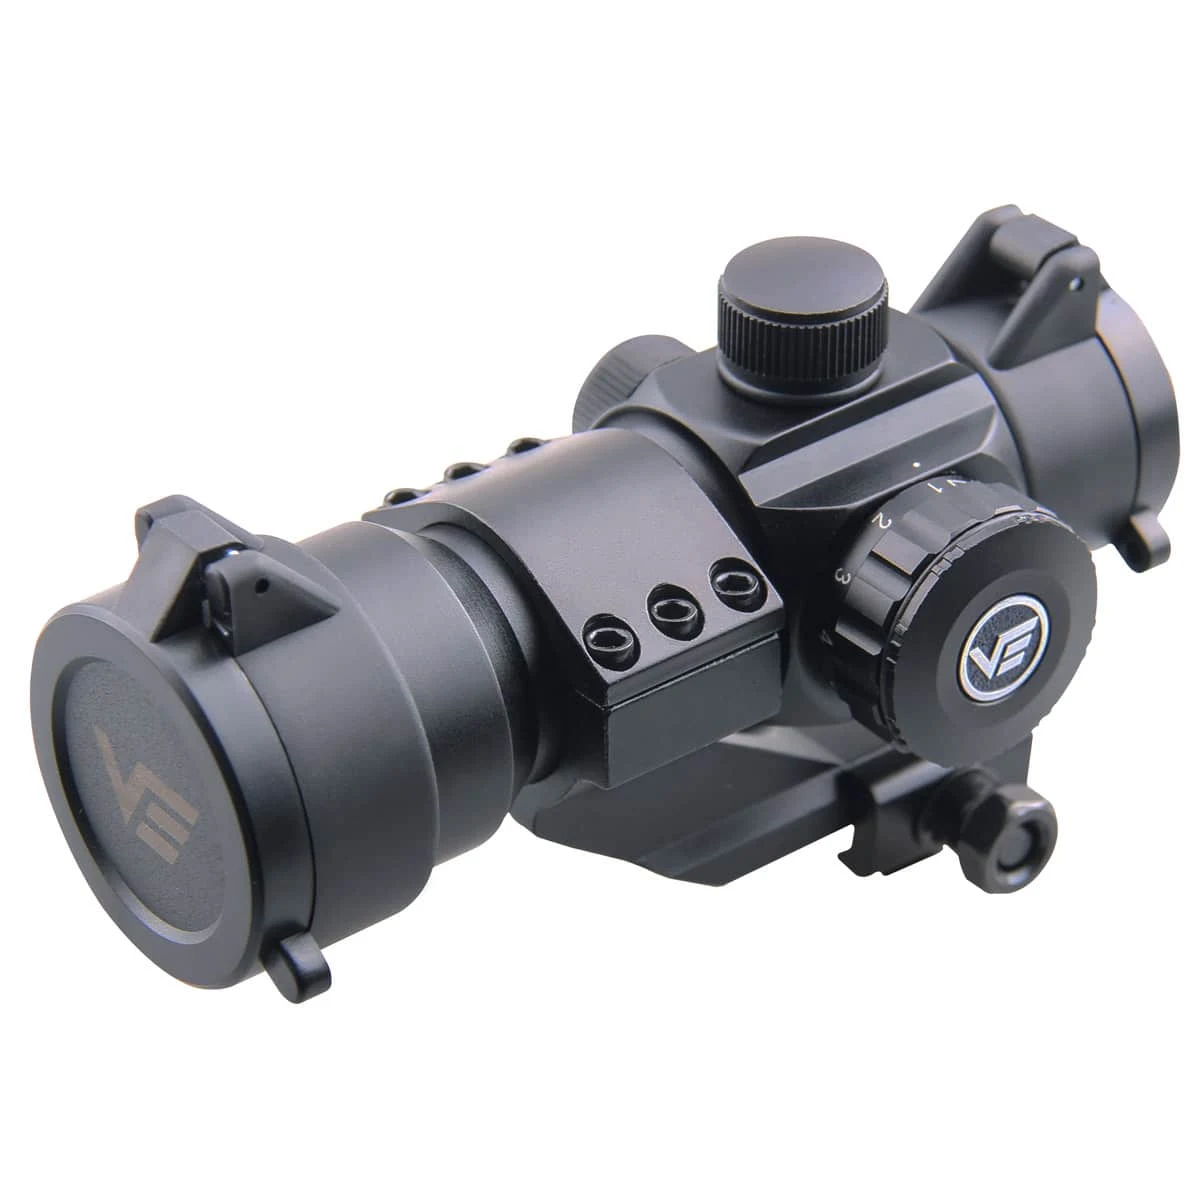 Stinger 1x28 Red Dot Sight-Vector Optics - Practical Solutions in 